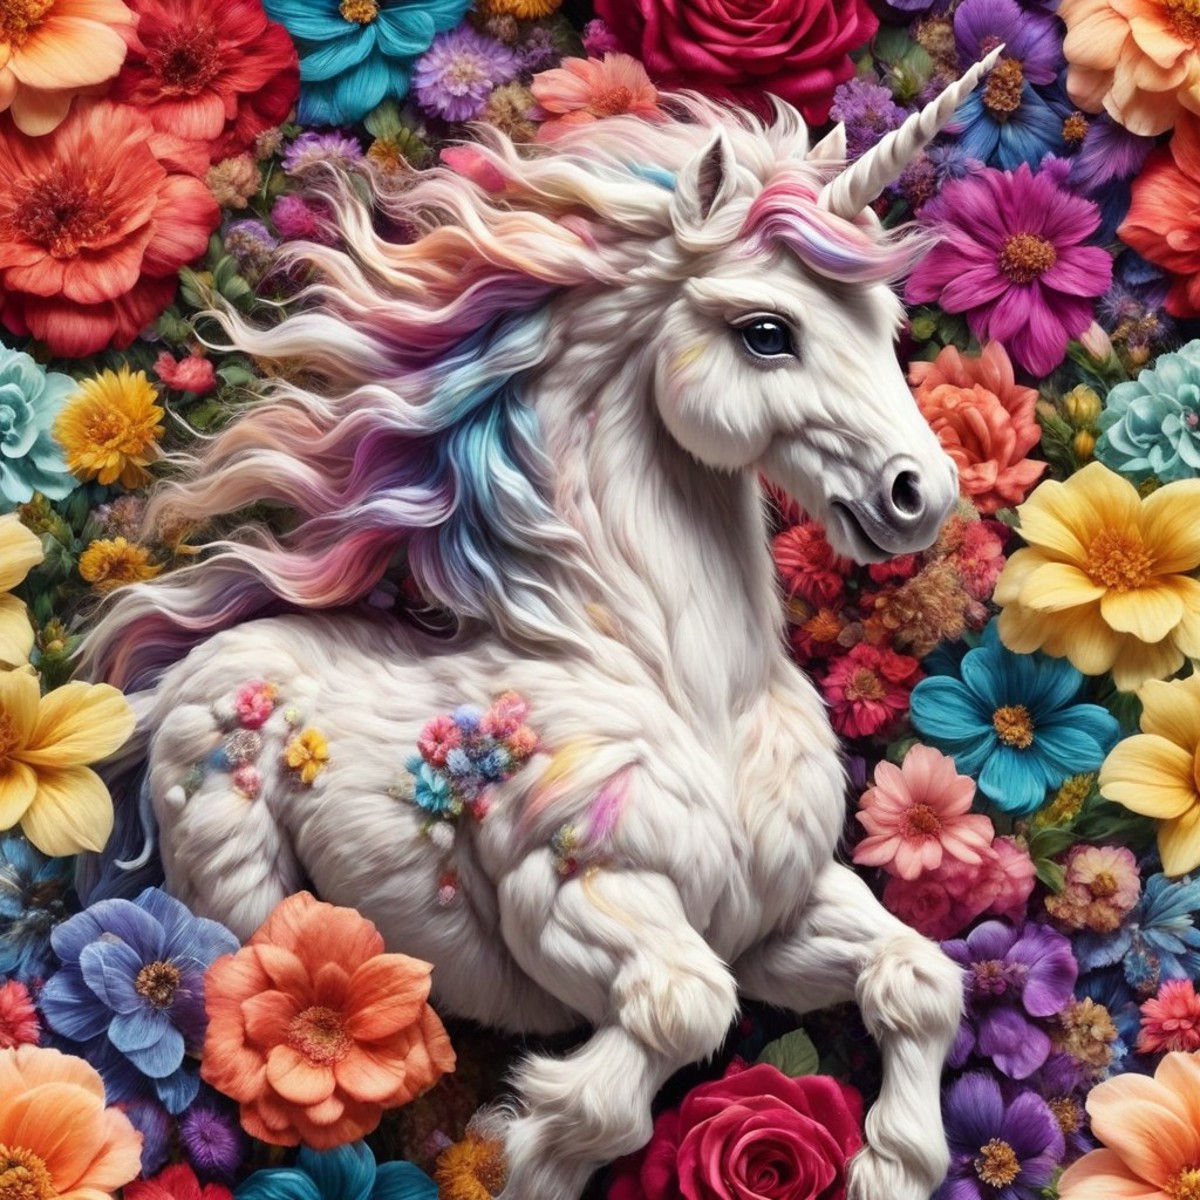 A Painted White Unicorn Sitting Among Colorful Flowers